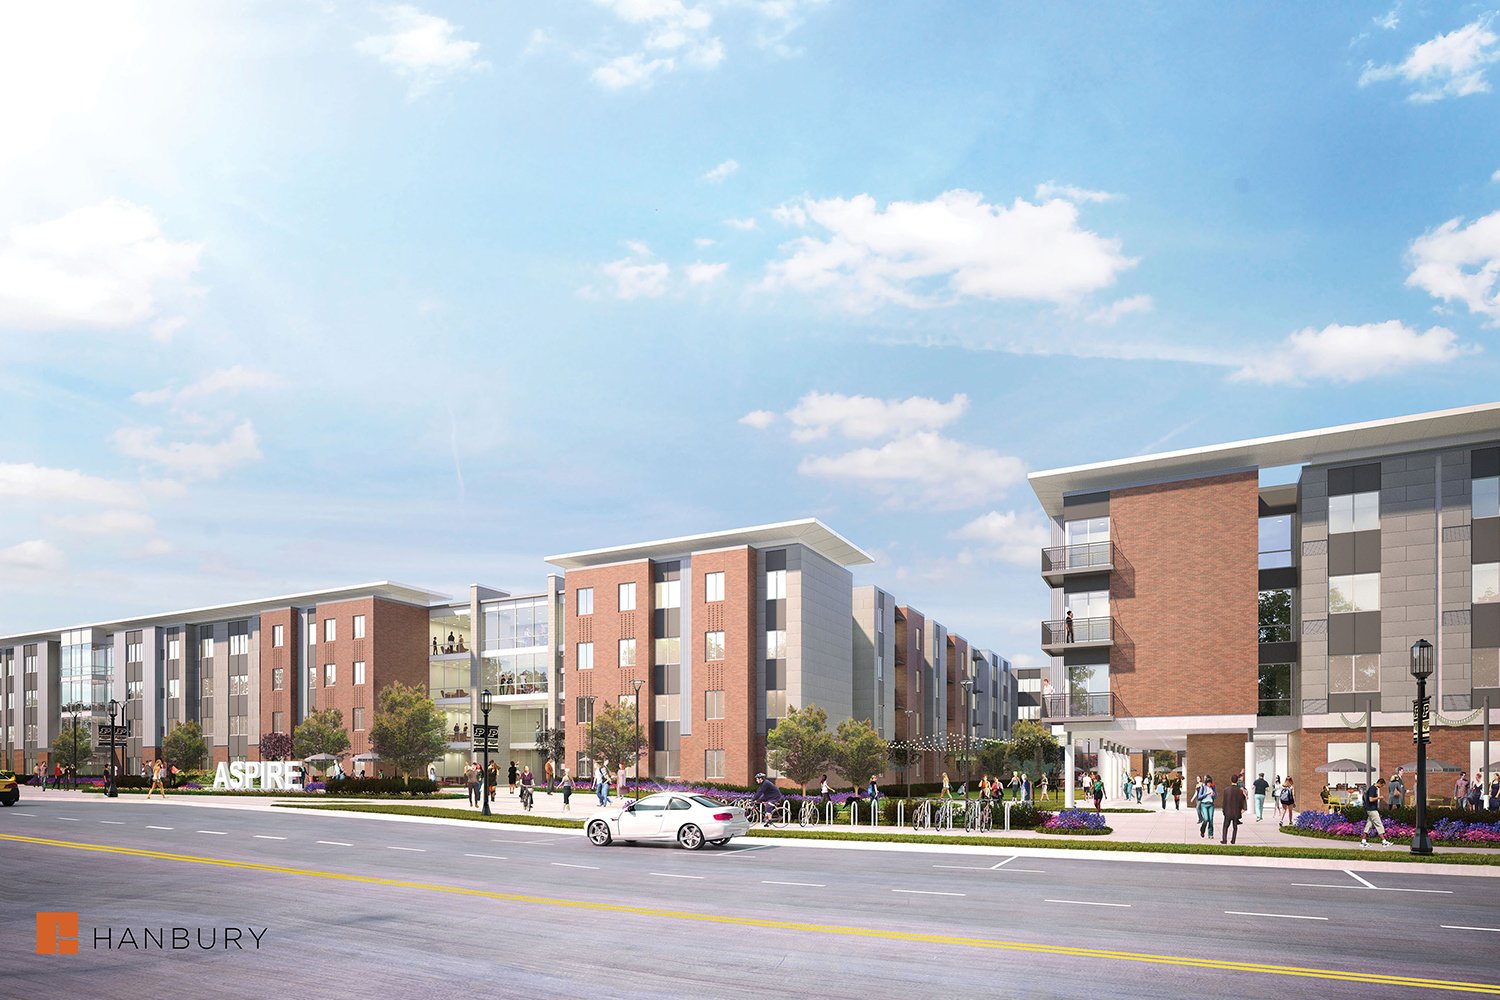 Construction of $86 million, 835-bed apartment complex to begin in Purdue west-side development district